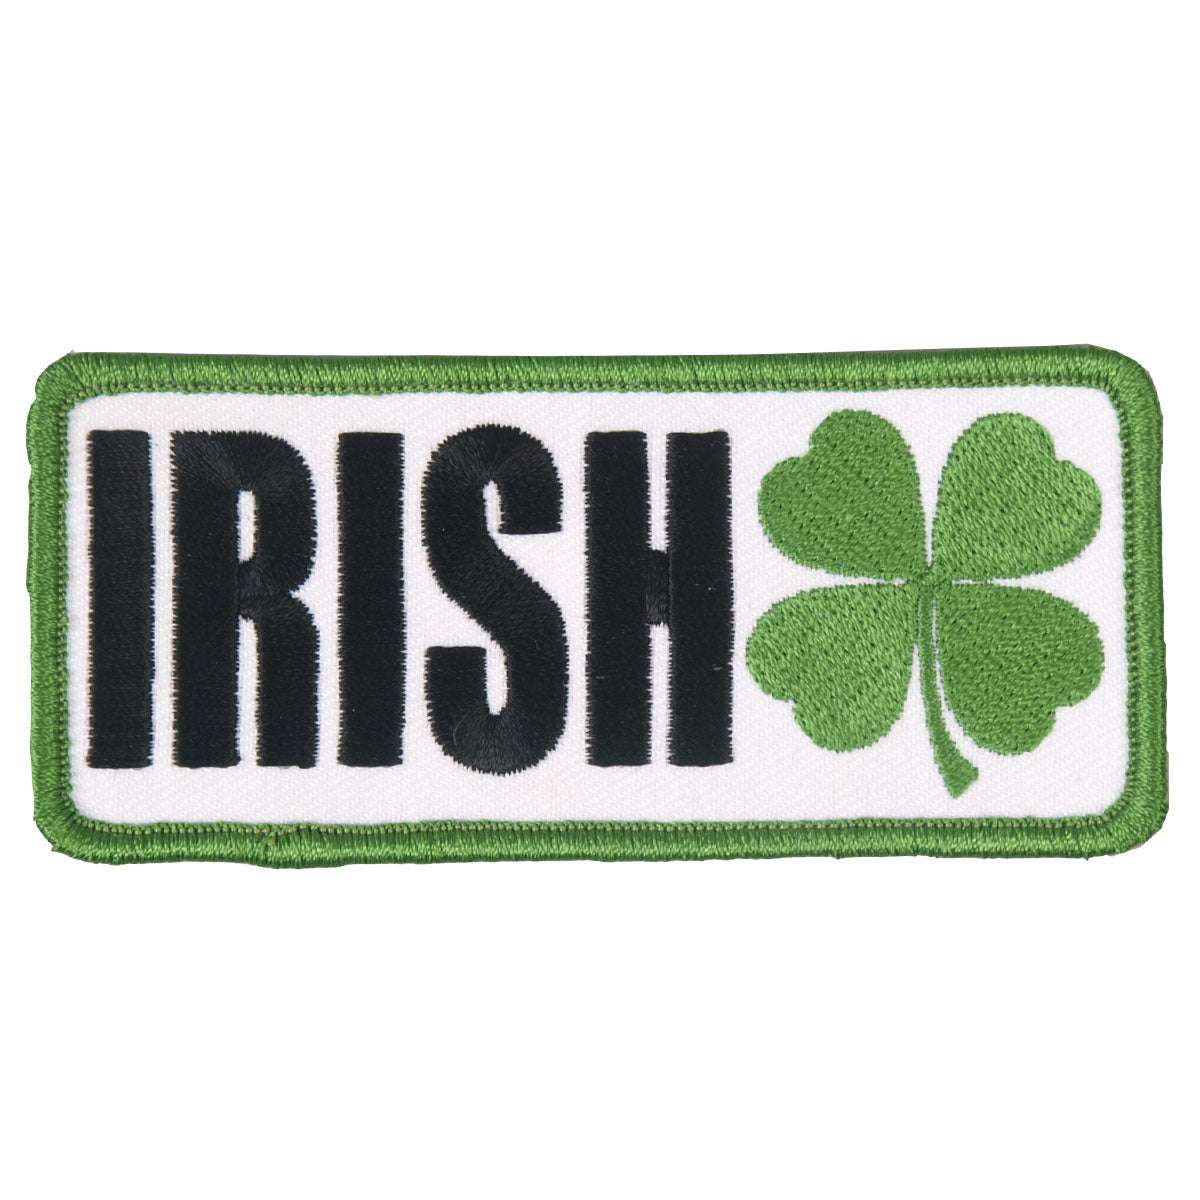 Hot Leathers Irish Clover Embroidered 4" x 2" Patch PPL9326